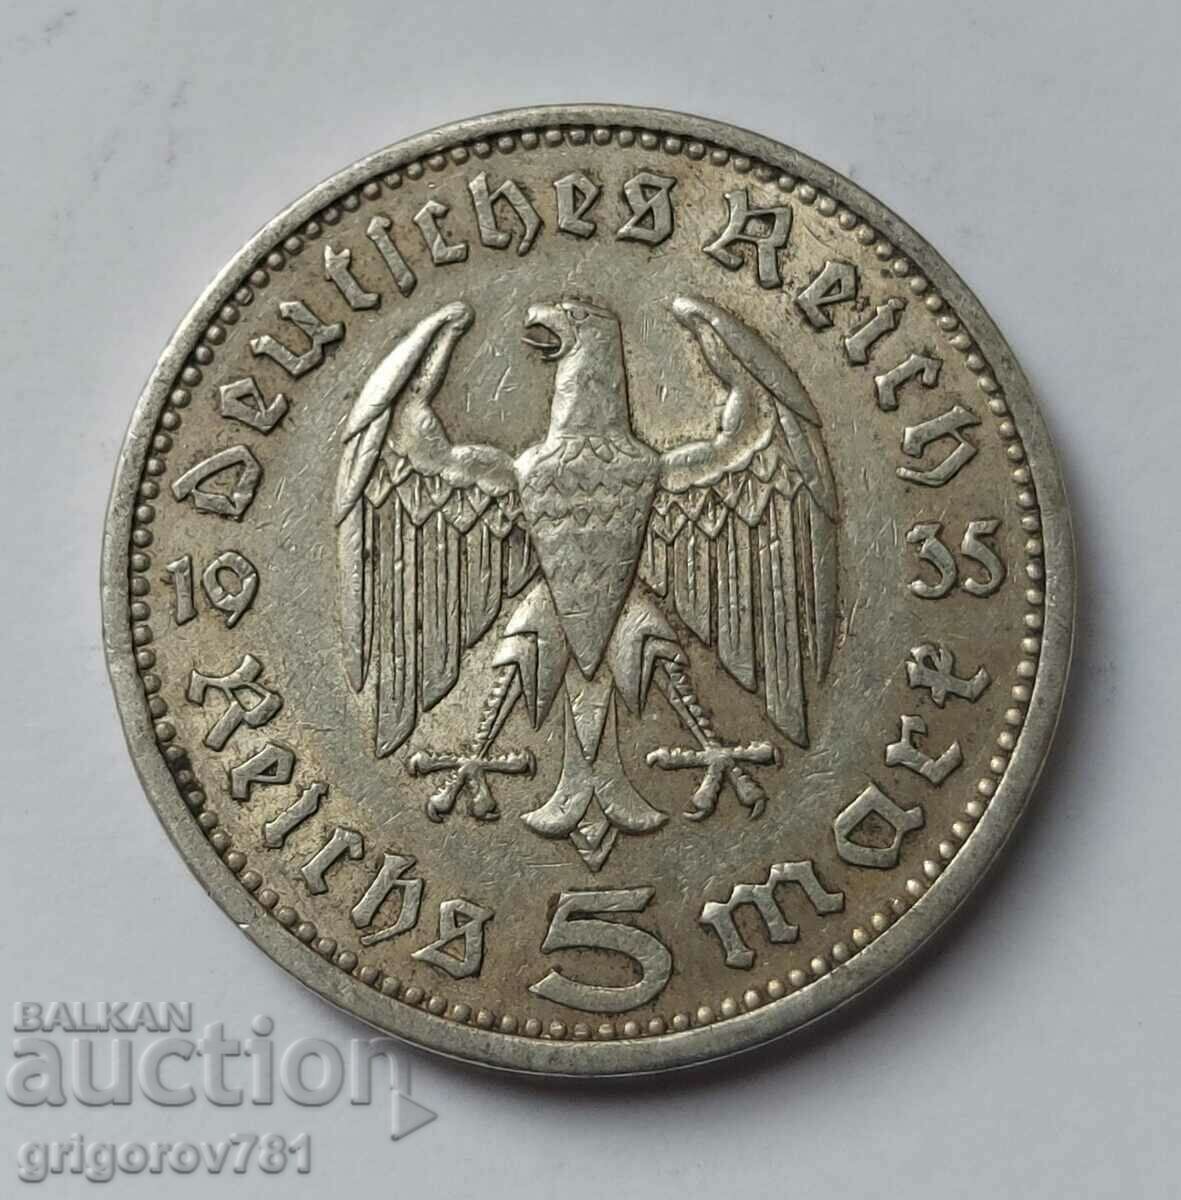 5 Mark Silver Germany 1935 A III Reich Silver Coin #24